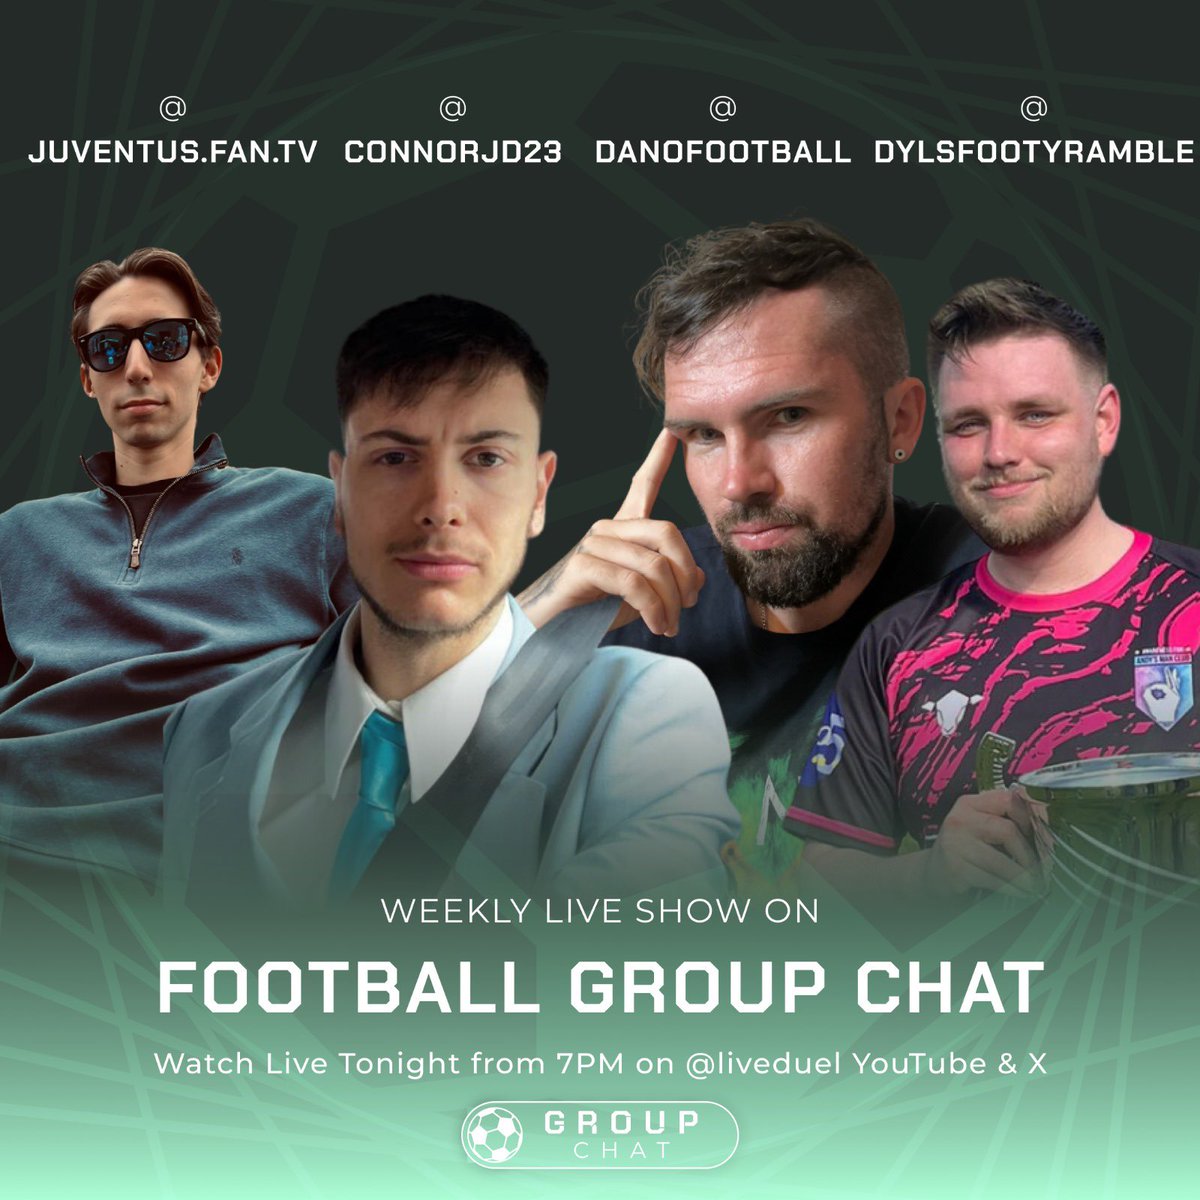 Tonight the @groupchathq is LIVE ⚽️ Tune in for all things football! Joined this evening by @dleggettmufc @DylsFootyRamble @ConnorJD23 @ Luca #footballpodcast